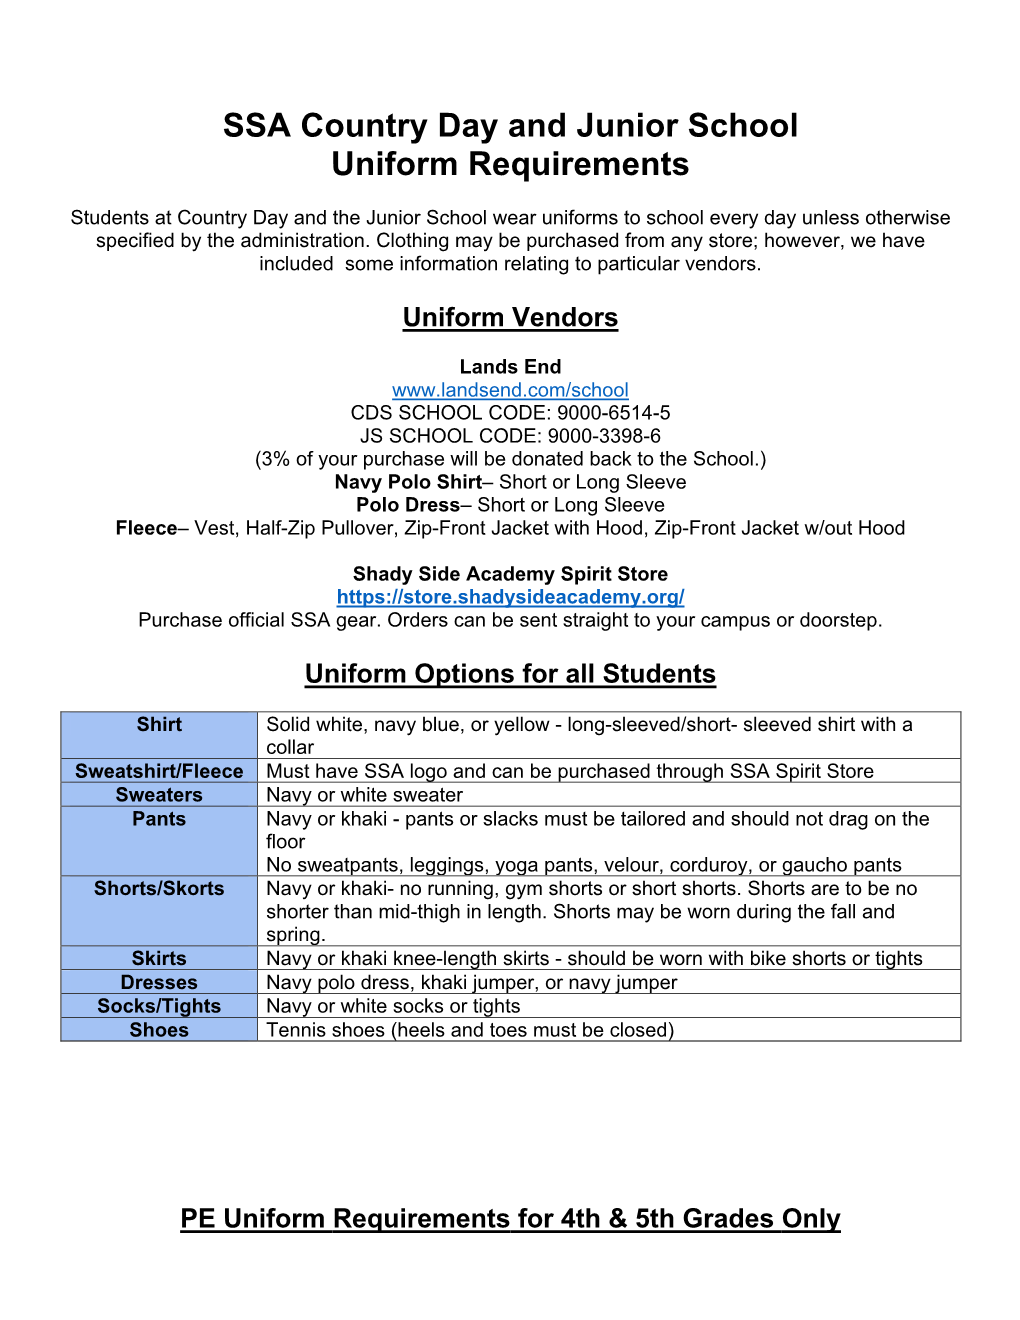 SSA Country Day and Junior School Uniform Requirements